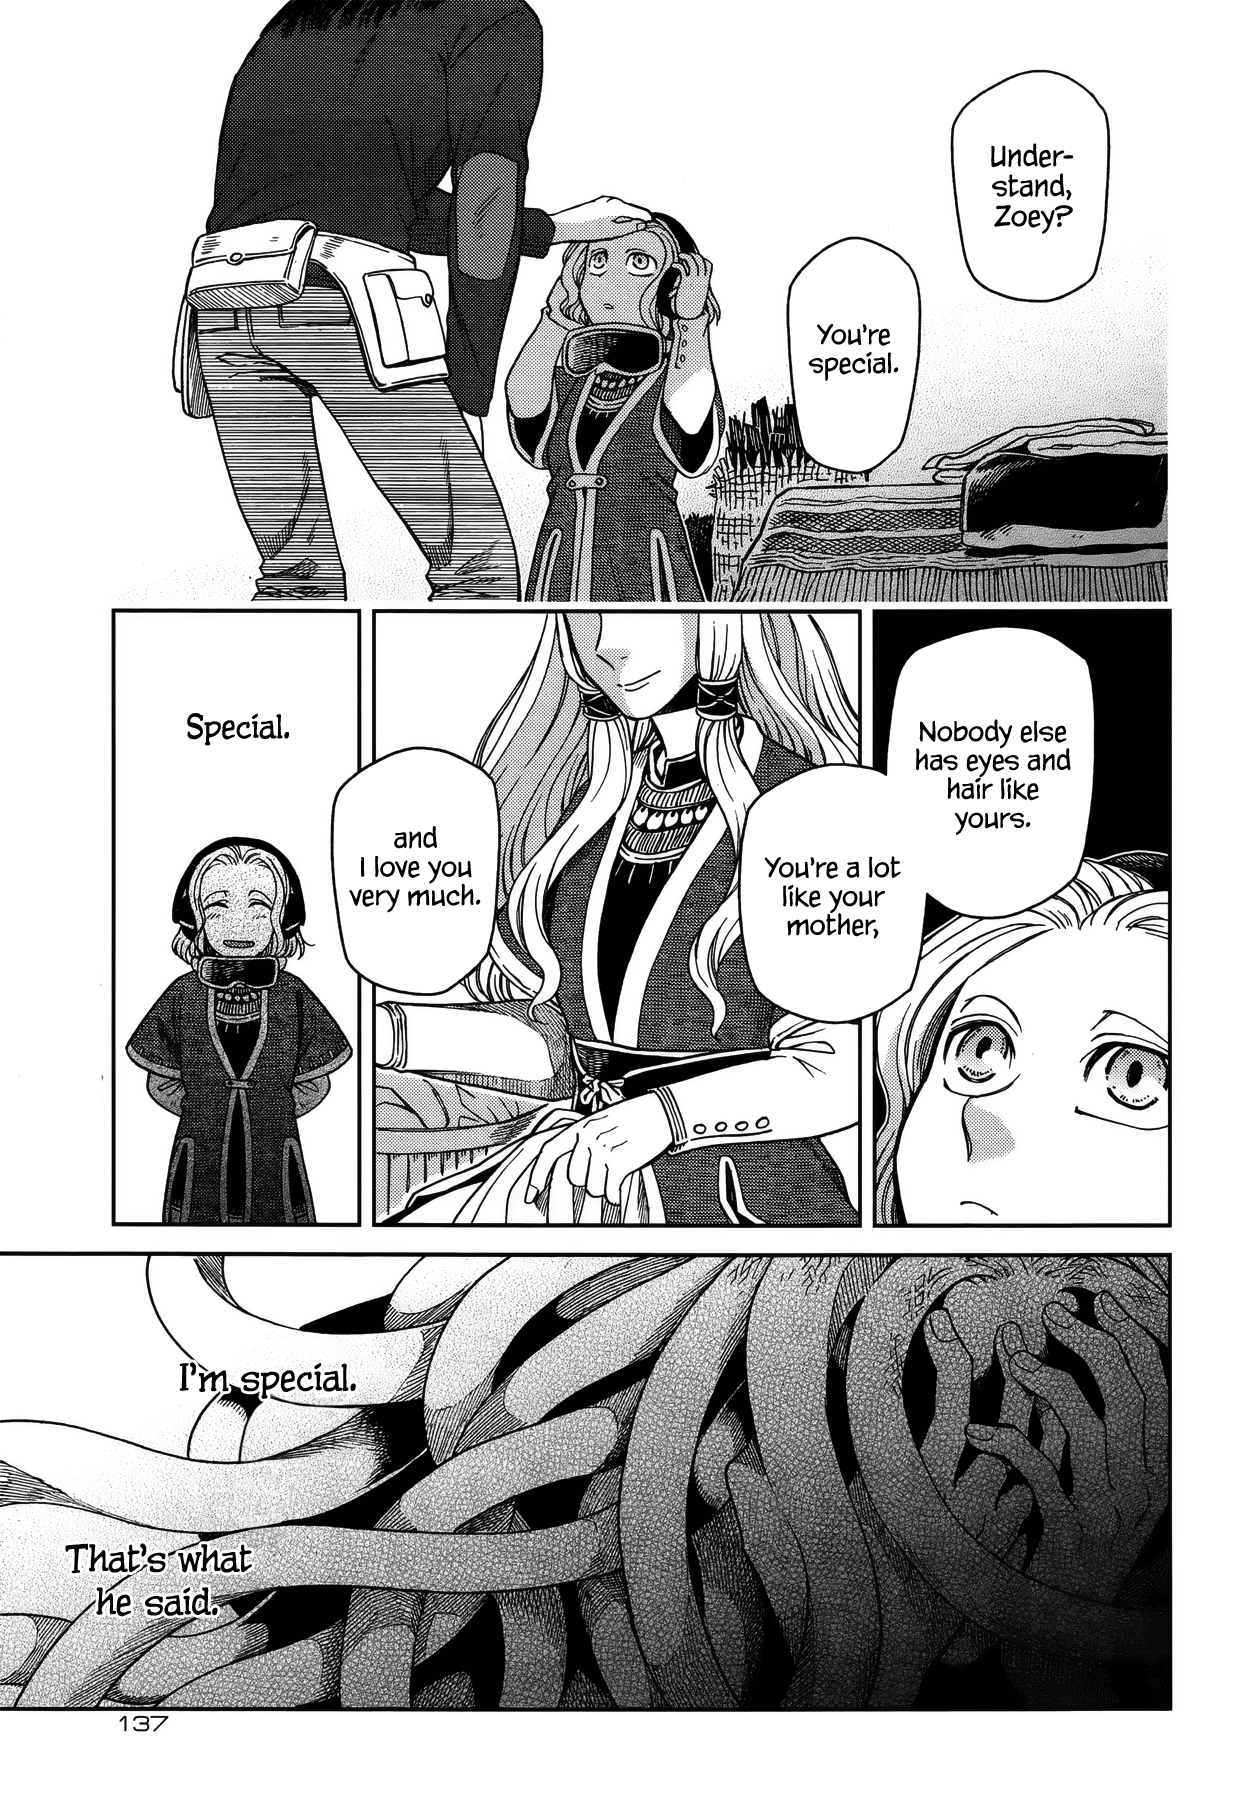 Mahoutsukai no Yome Vol.11-Chapter.55-First-impressions-are-the-most-lasting-III Image